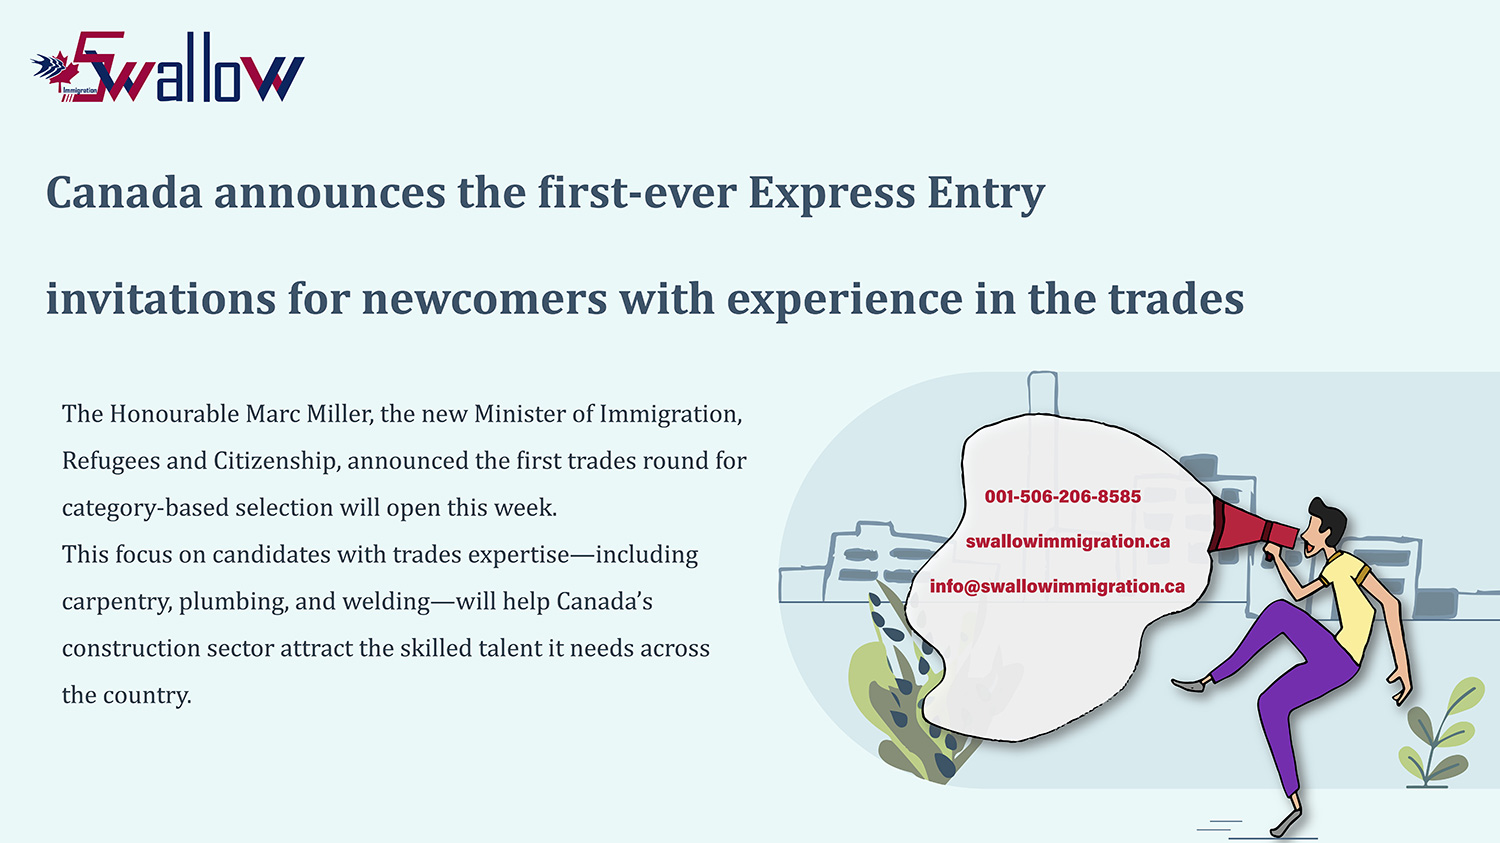 Canada announces the first-ever Express Entry invitations for newcomers with experience in the trades